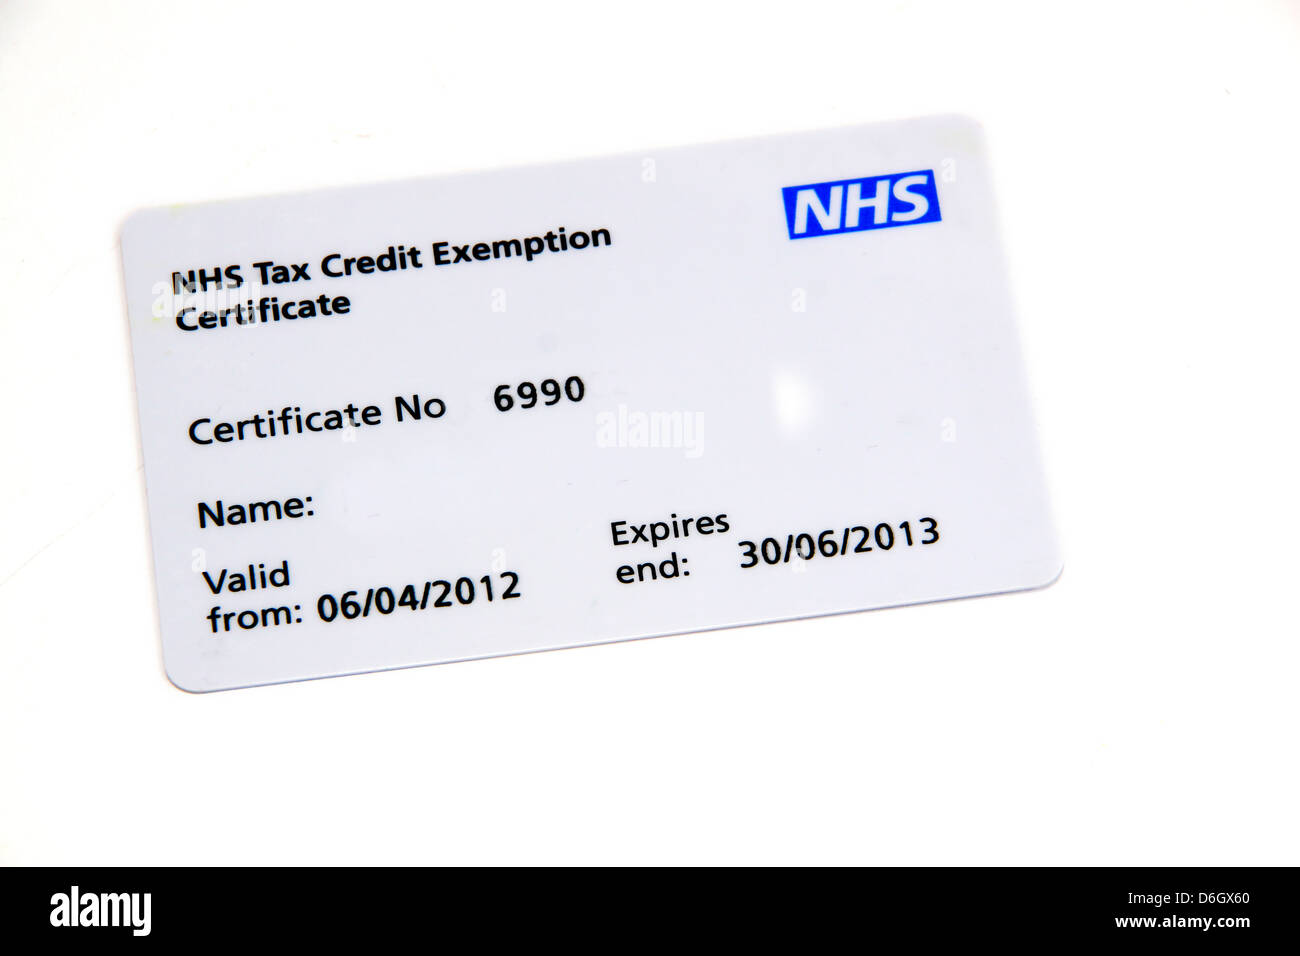 uk-nhs-tax-credit-exemption-certificate-card-stock-photo-royalty-free